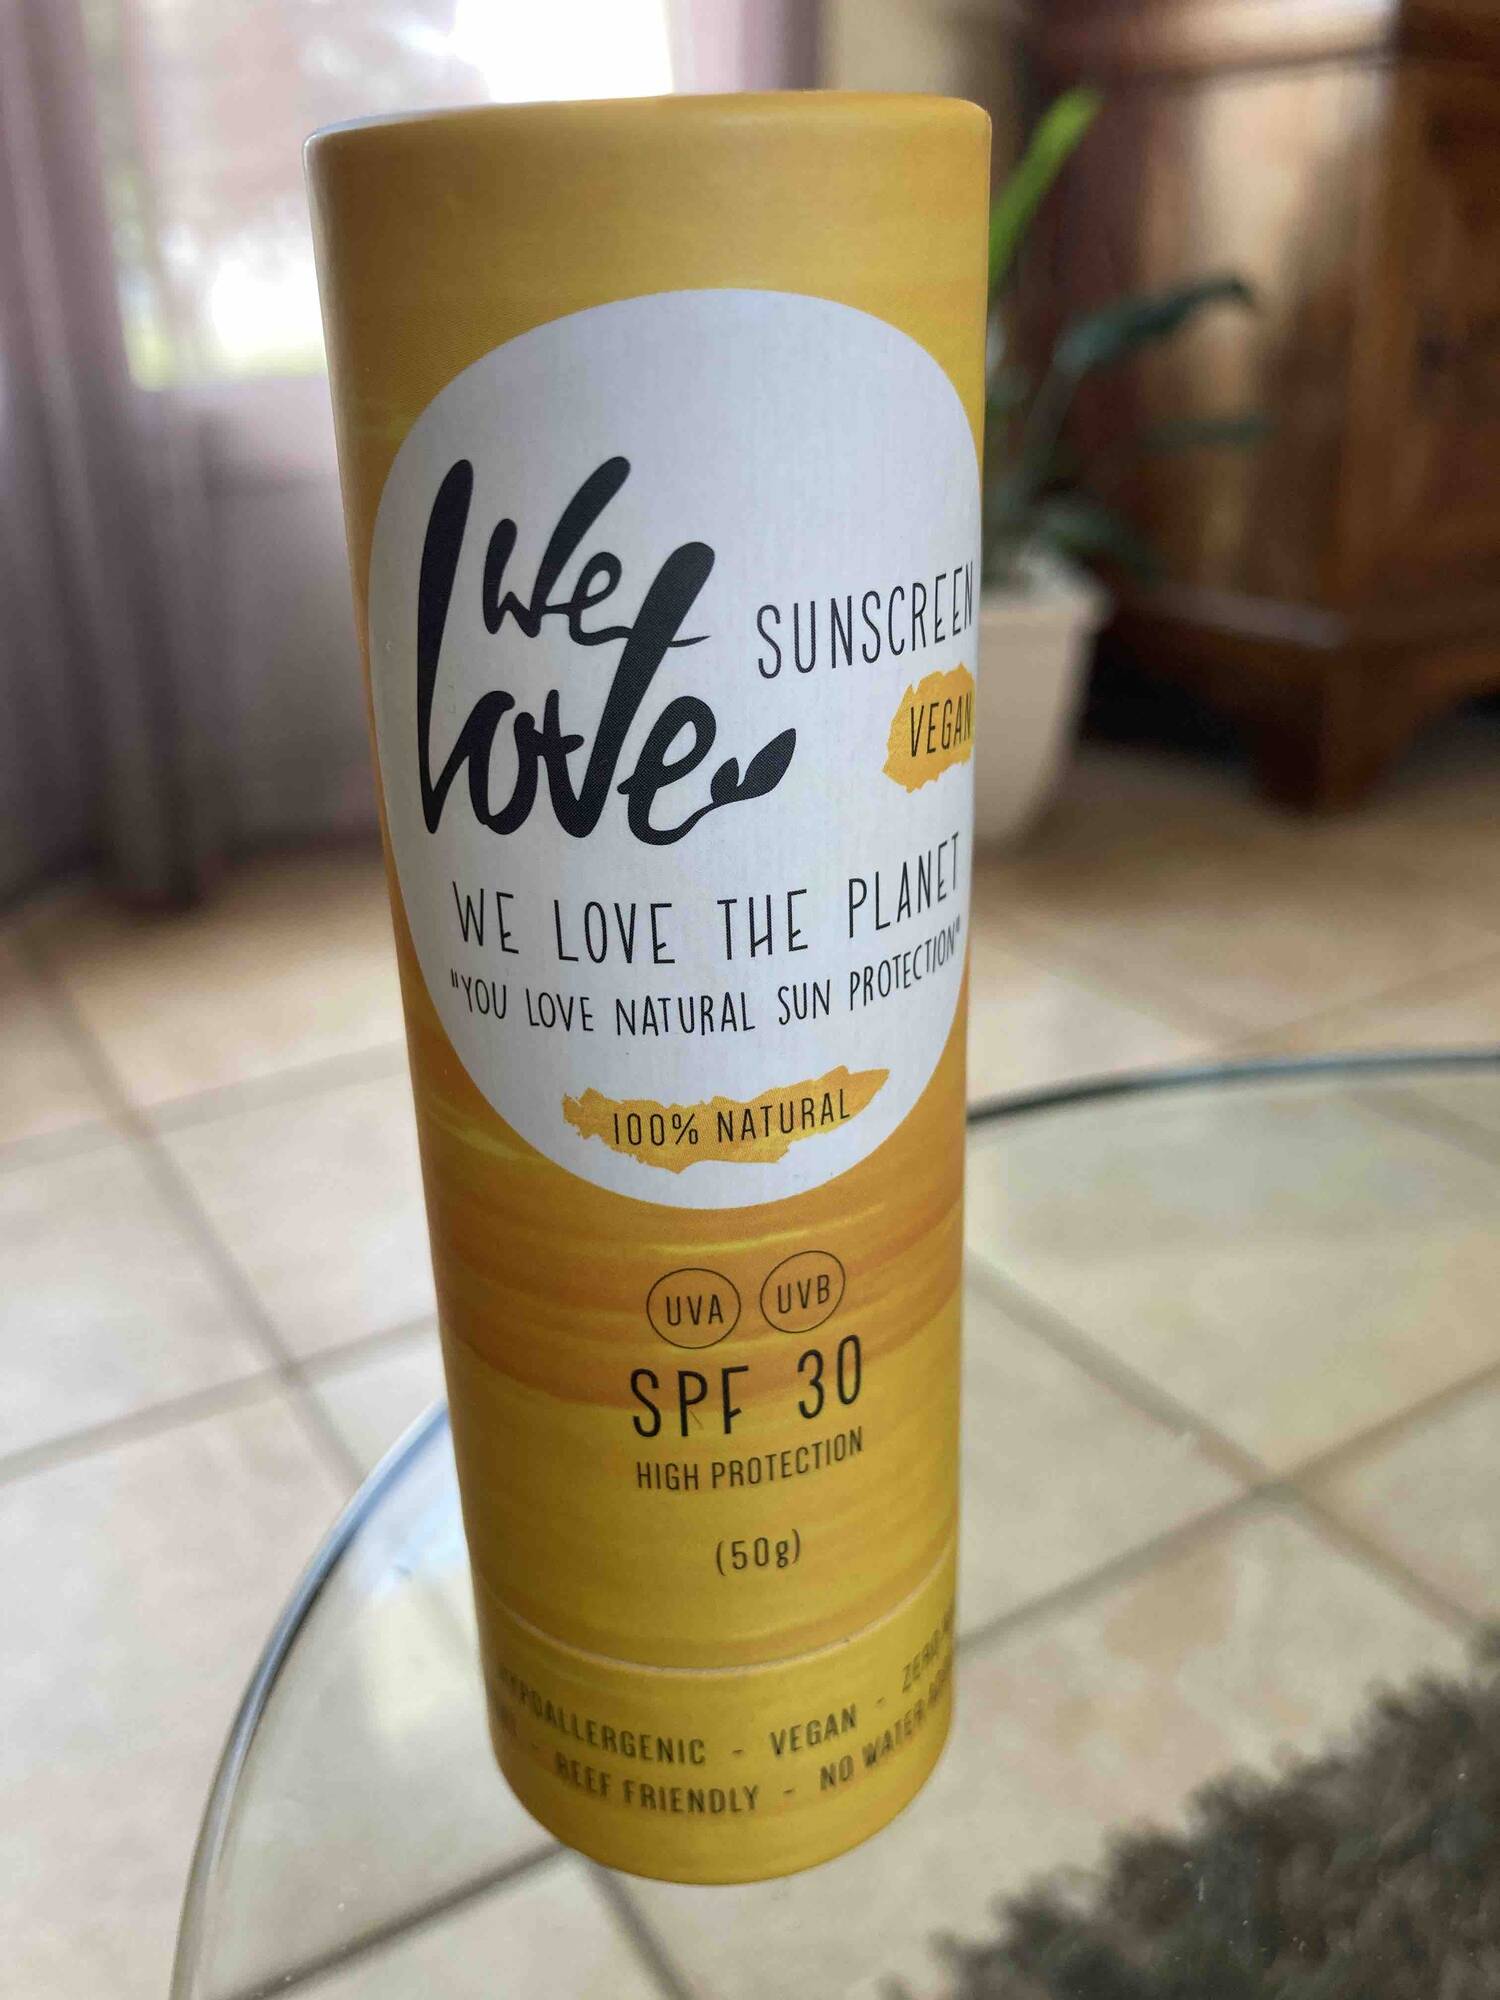 WE LOVE THE PLANET - Sunscreen SPF 30